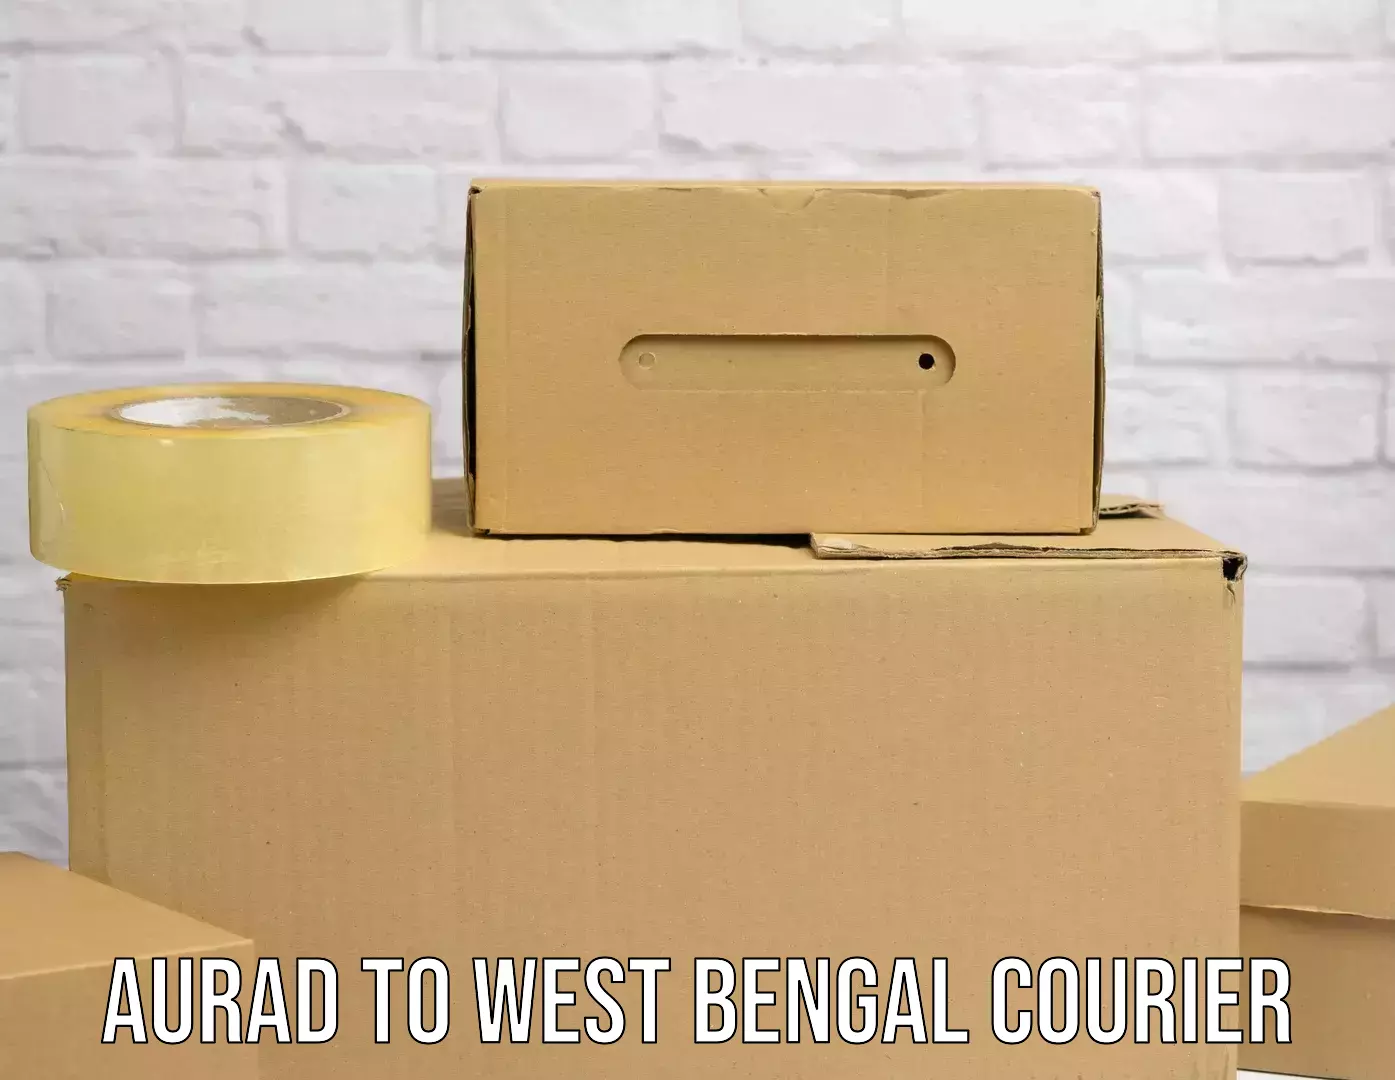 Package delivery network Aurad to West Bengal